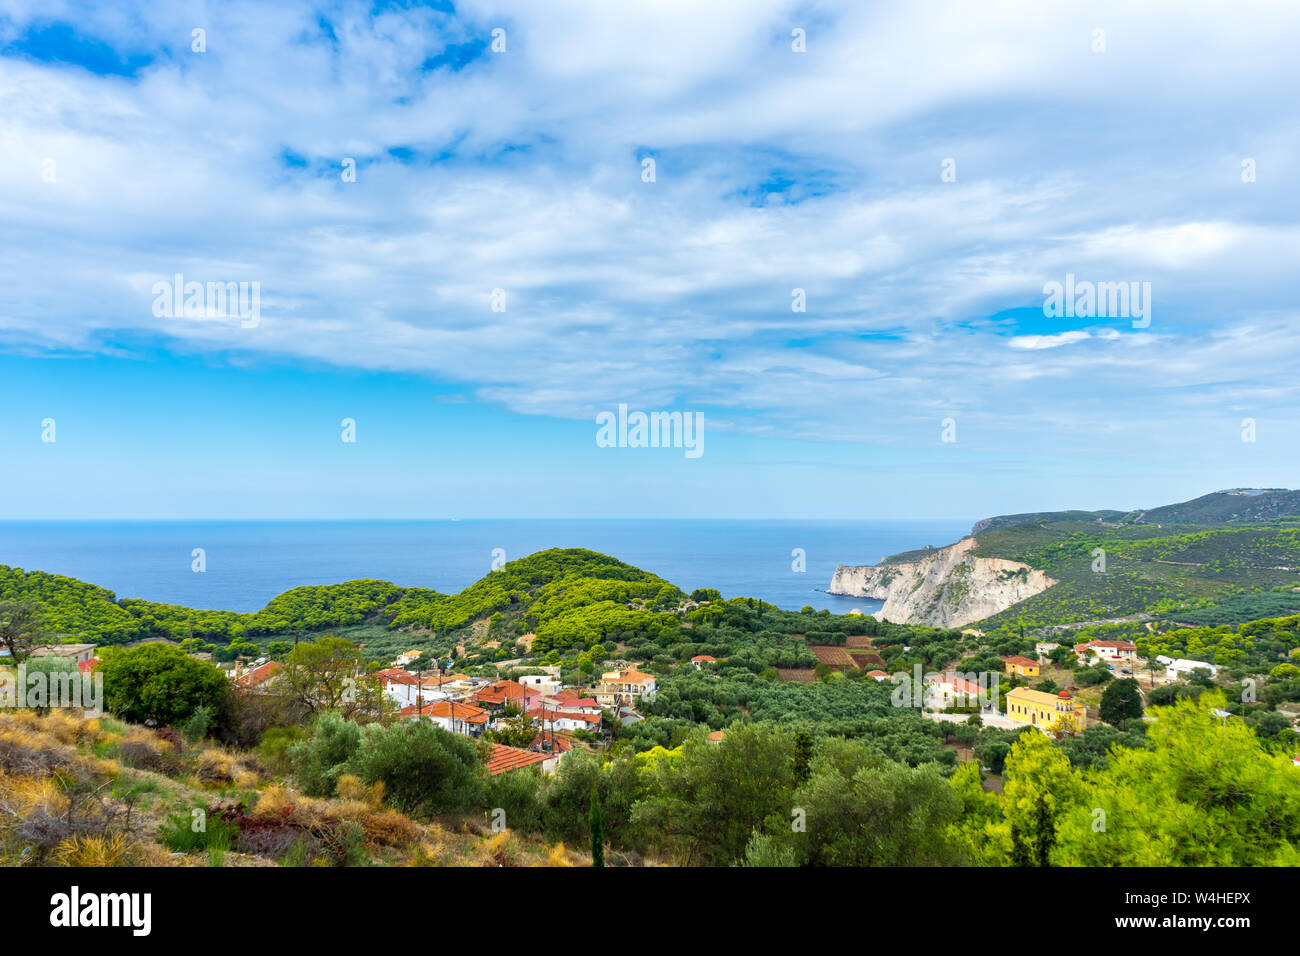 Greece, Zakynthos, Beautiful untouched nature and a small village at the coast Stock Photo